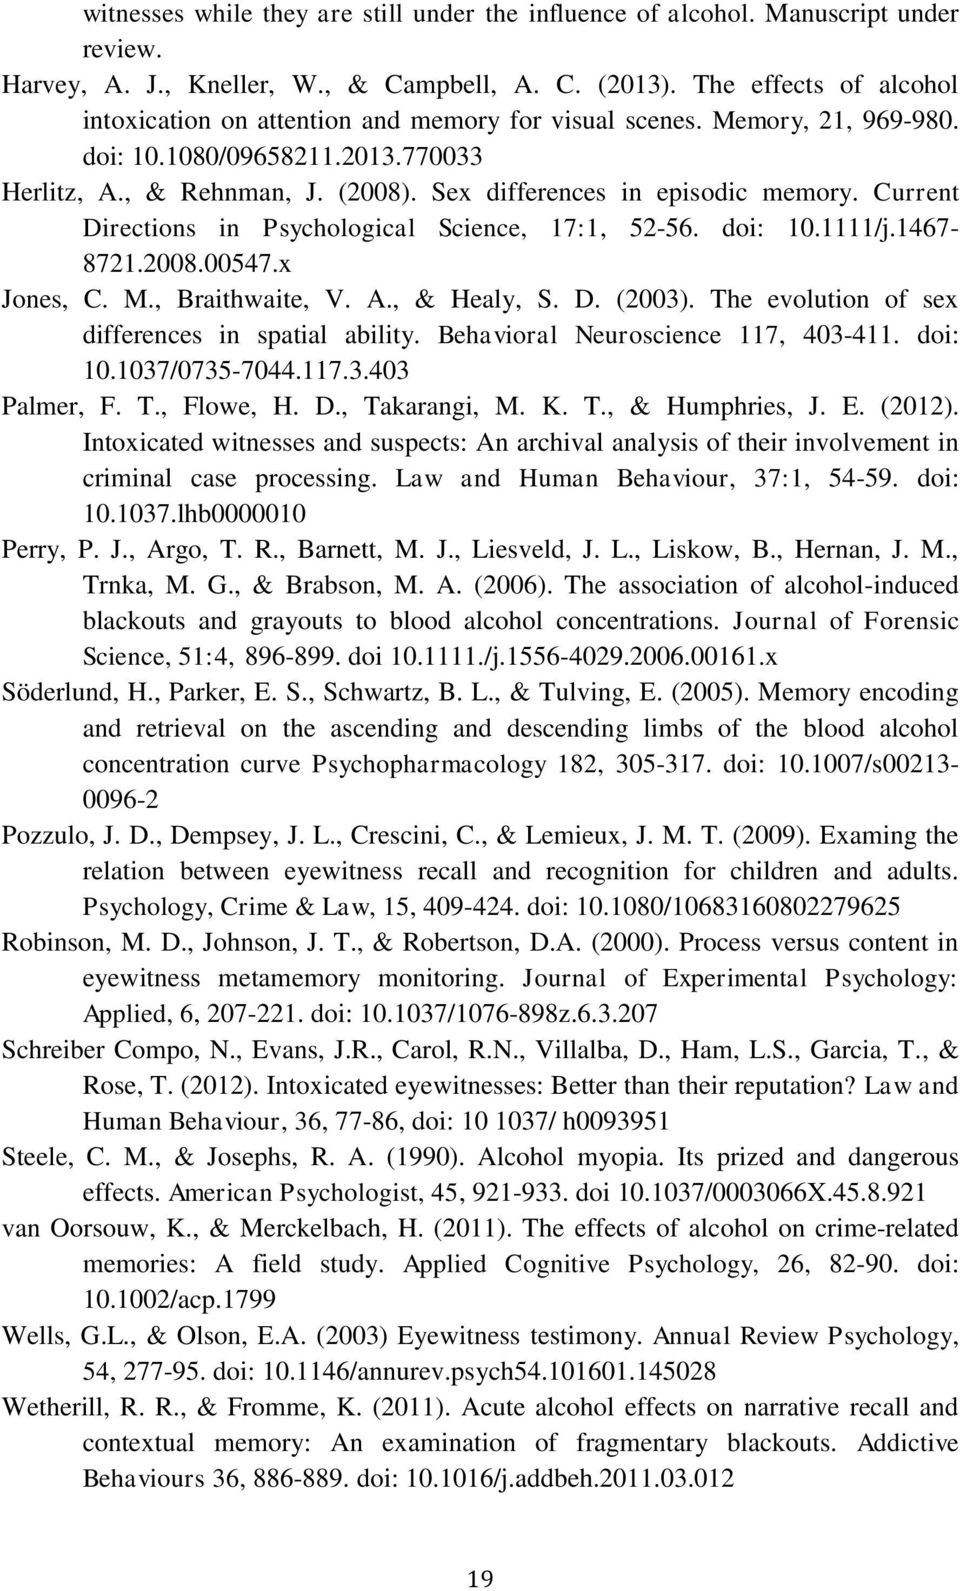 Sex differences in episodic memory. Current Directions in Psychological Science, 17:1, 52-56. doi: 10.1111/j.1467-8721.2008.00547.x Jones, C. M., Braithwaite, V. A., & Healy, S. D. (2003).